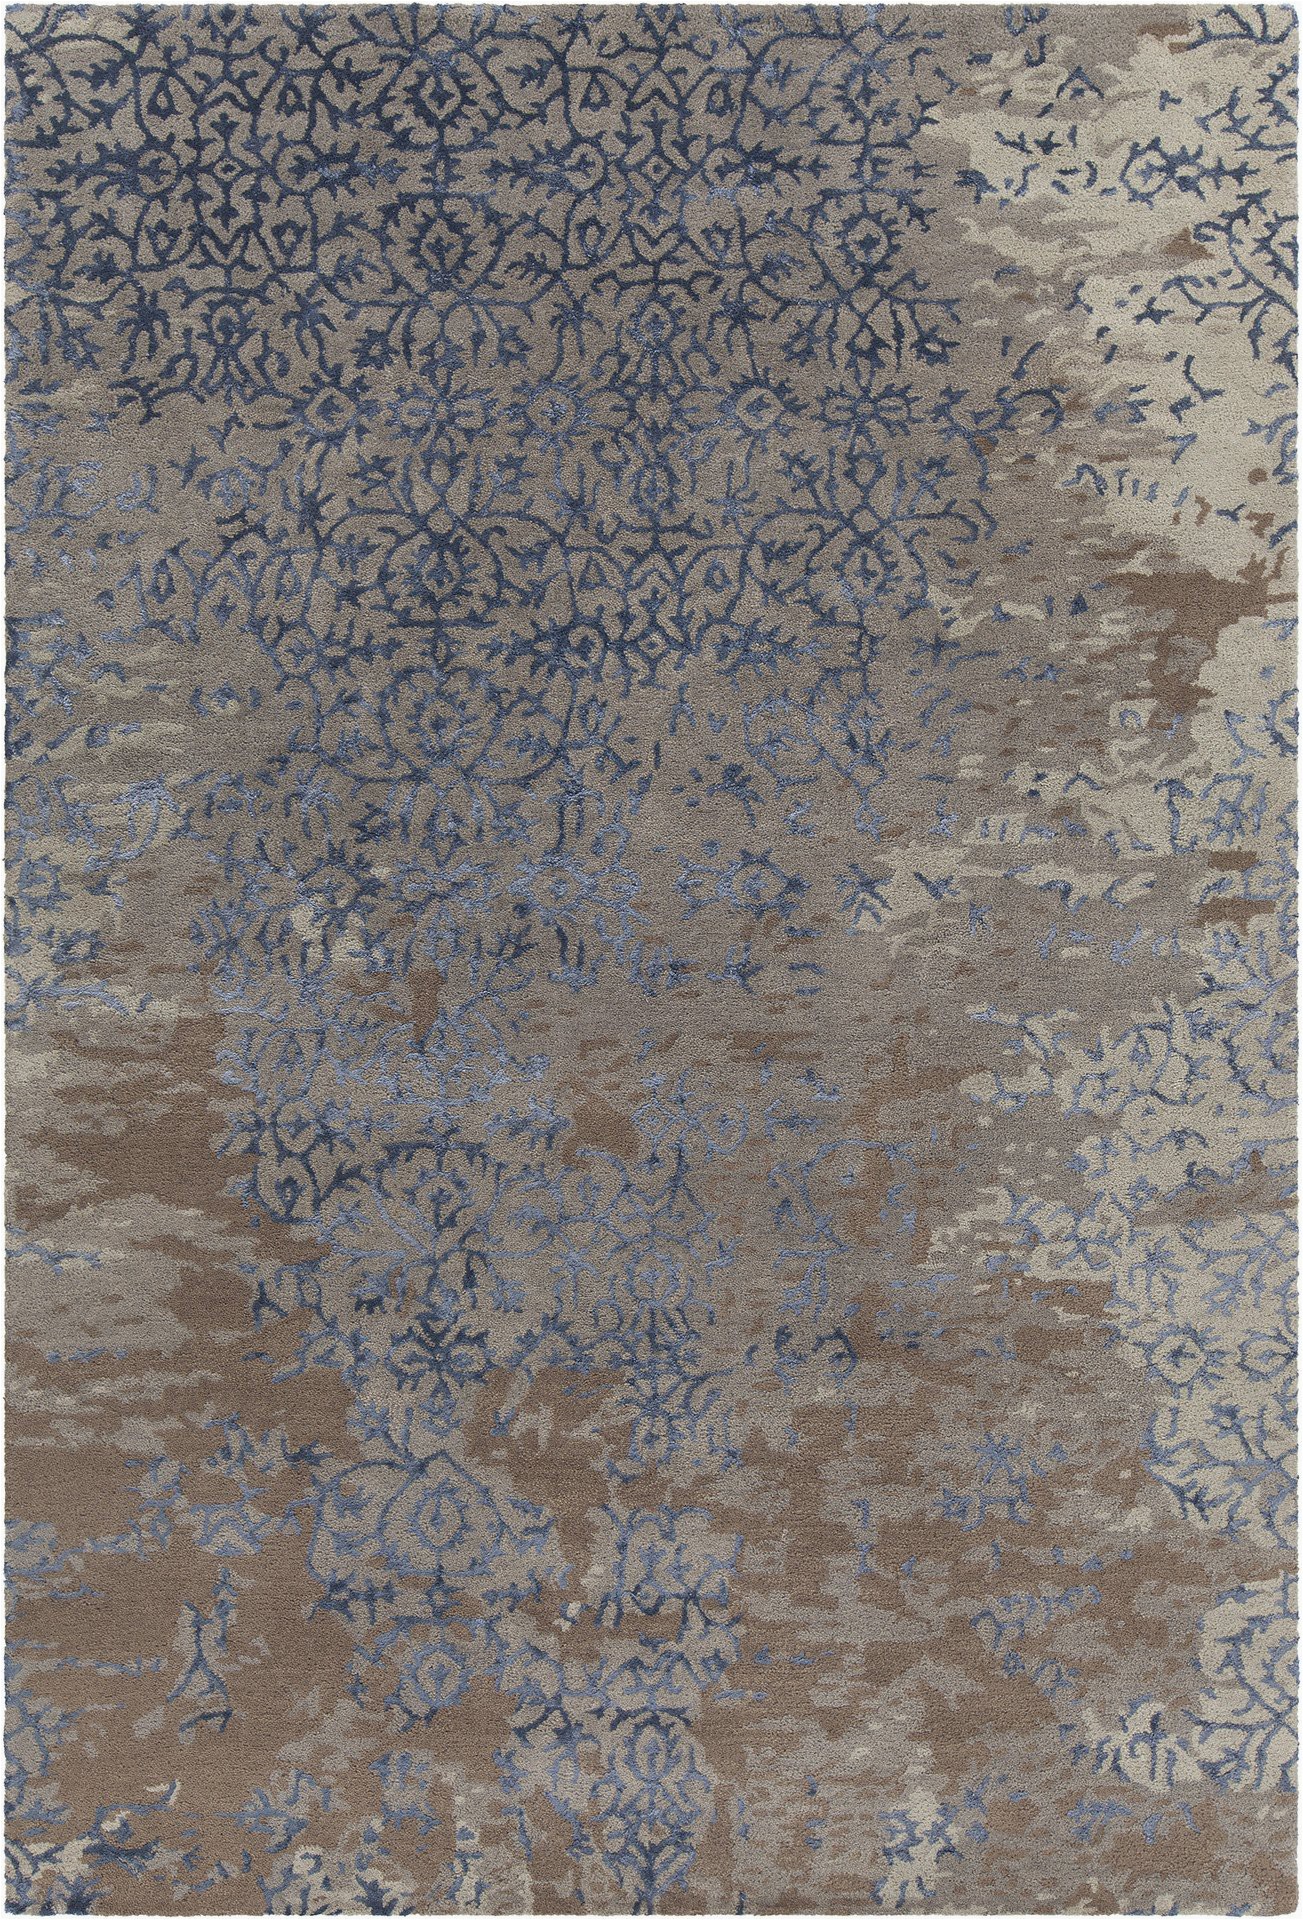 Blue and Brown Bath Rugs Rupec Collection Hand Tufted area Rug In Grey Blue & Brown